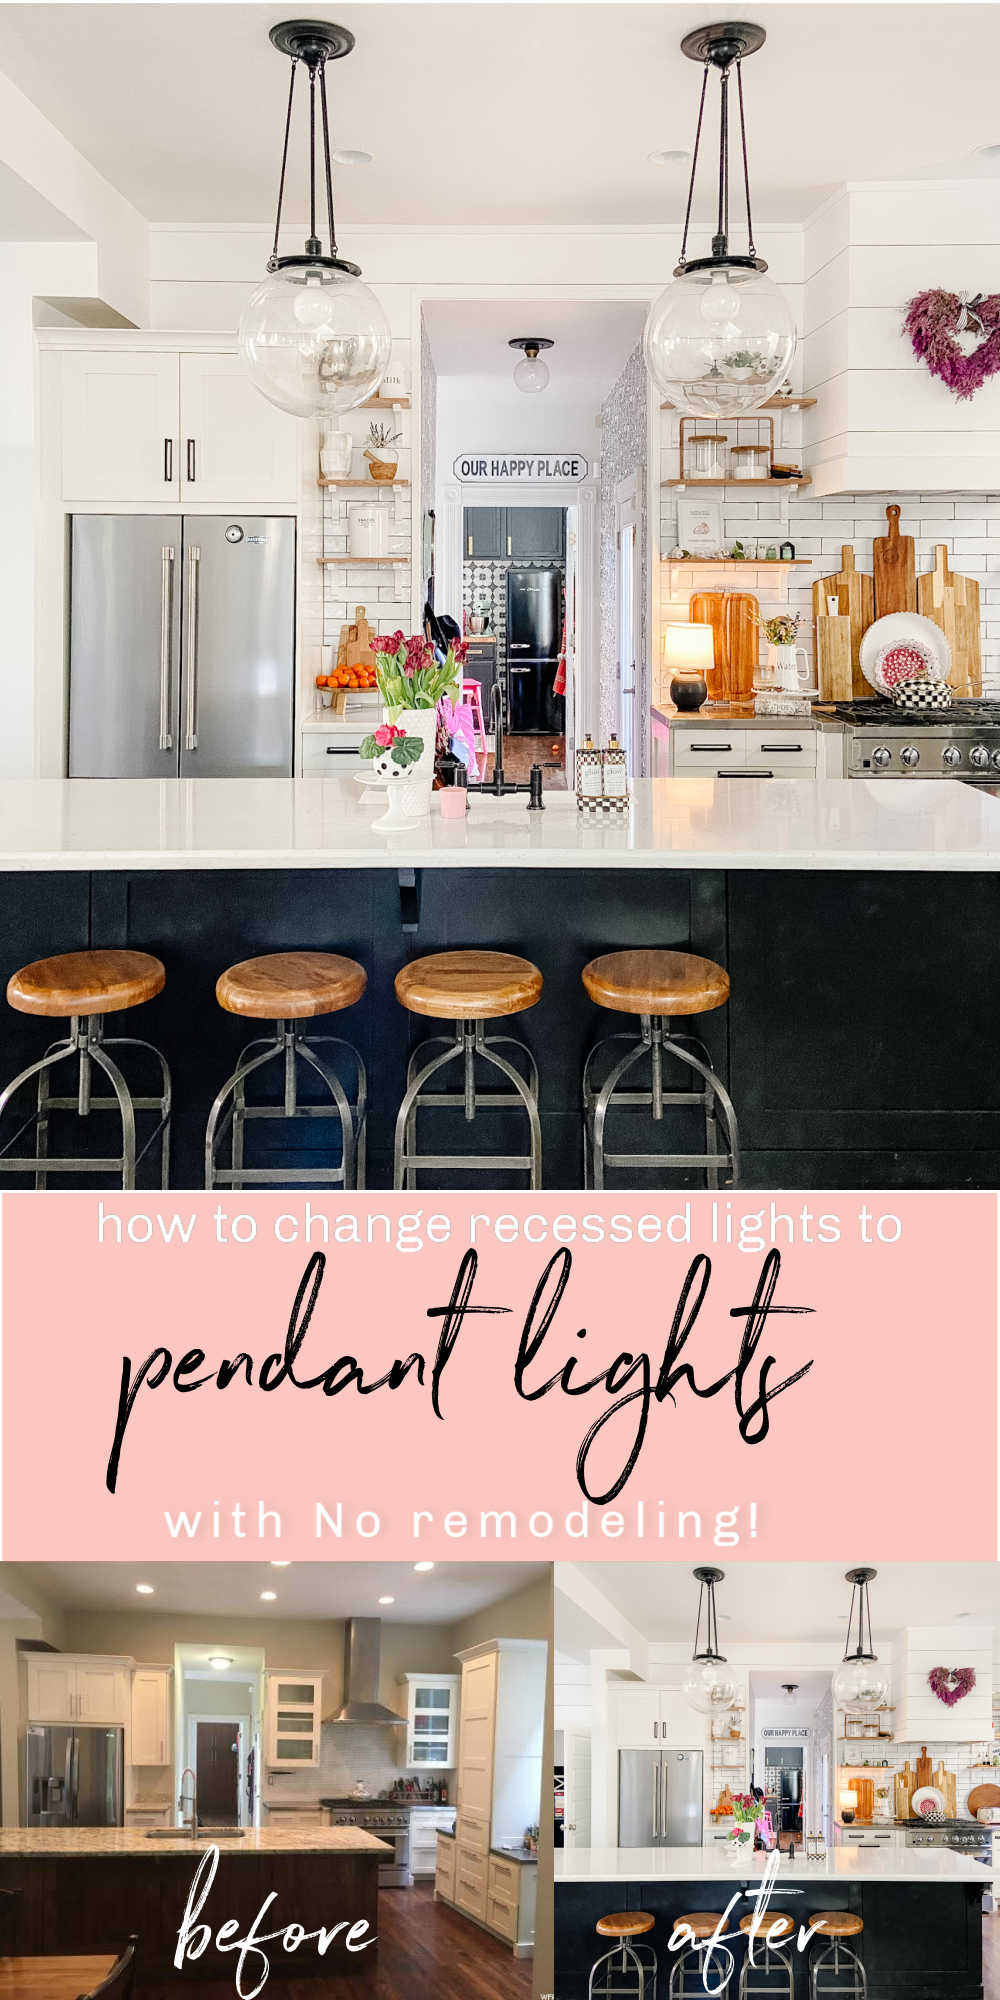 A Recessed Can Light To Pendant, How To Change Chandelier Lights